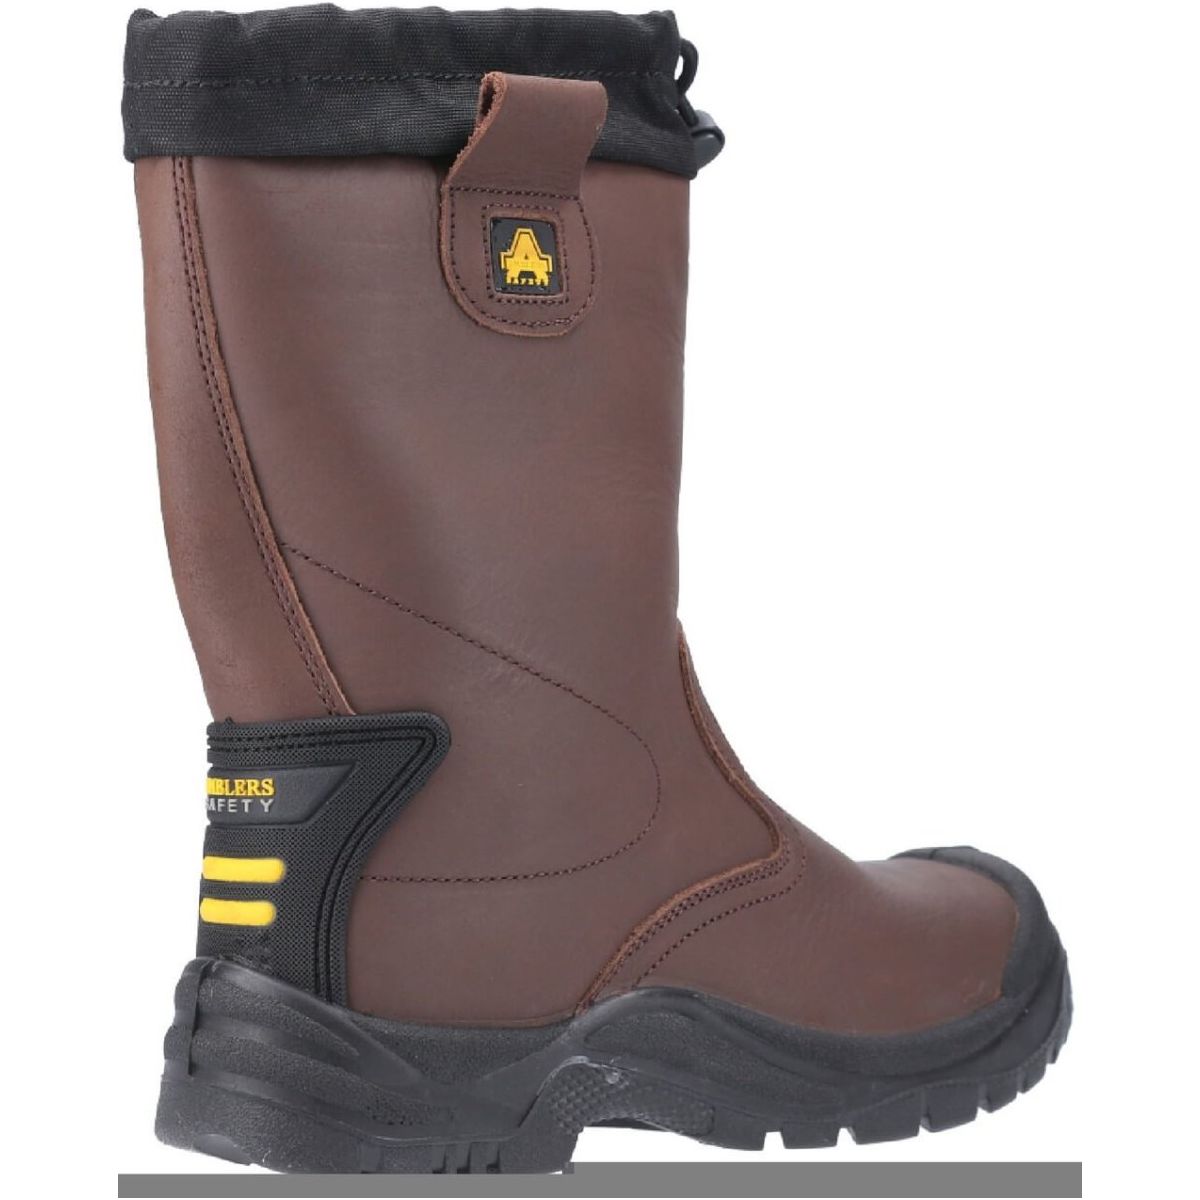 Amblers Fs245 Antistatic Safety Rigger Boots Mens - workweargurus.com